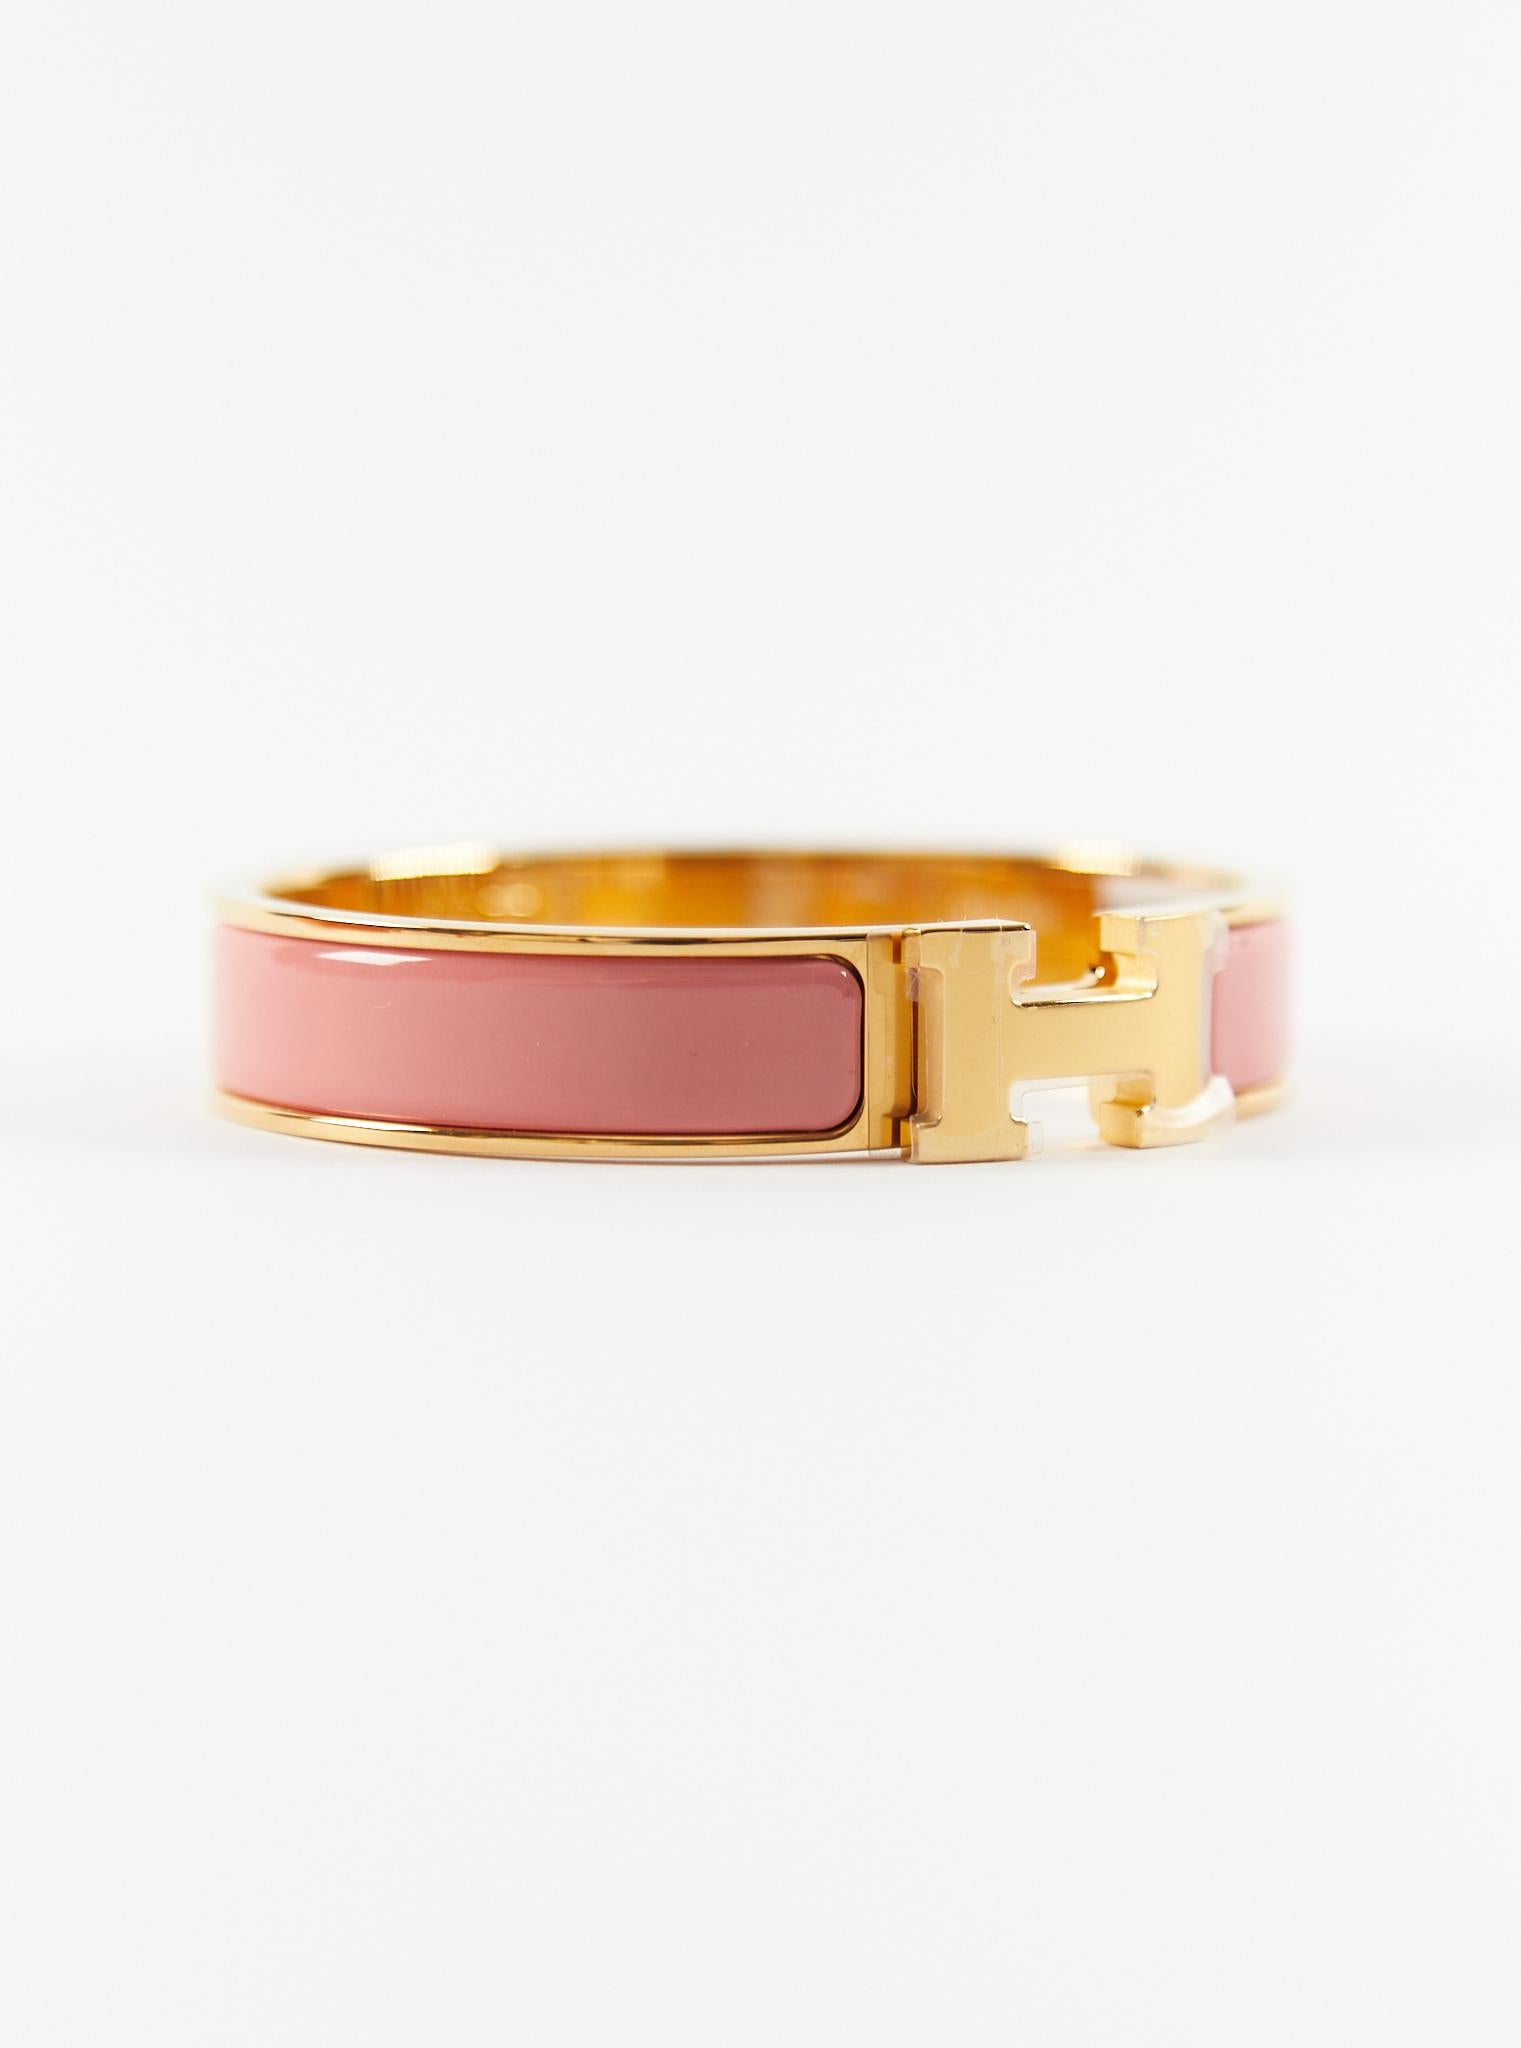 Hermès Clic H PM Bracelet in Papaye and Gold

Wrist size: 16.8 cm  Width: 12 mm

Made in France

